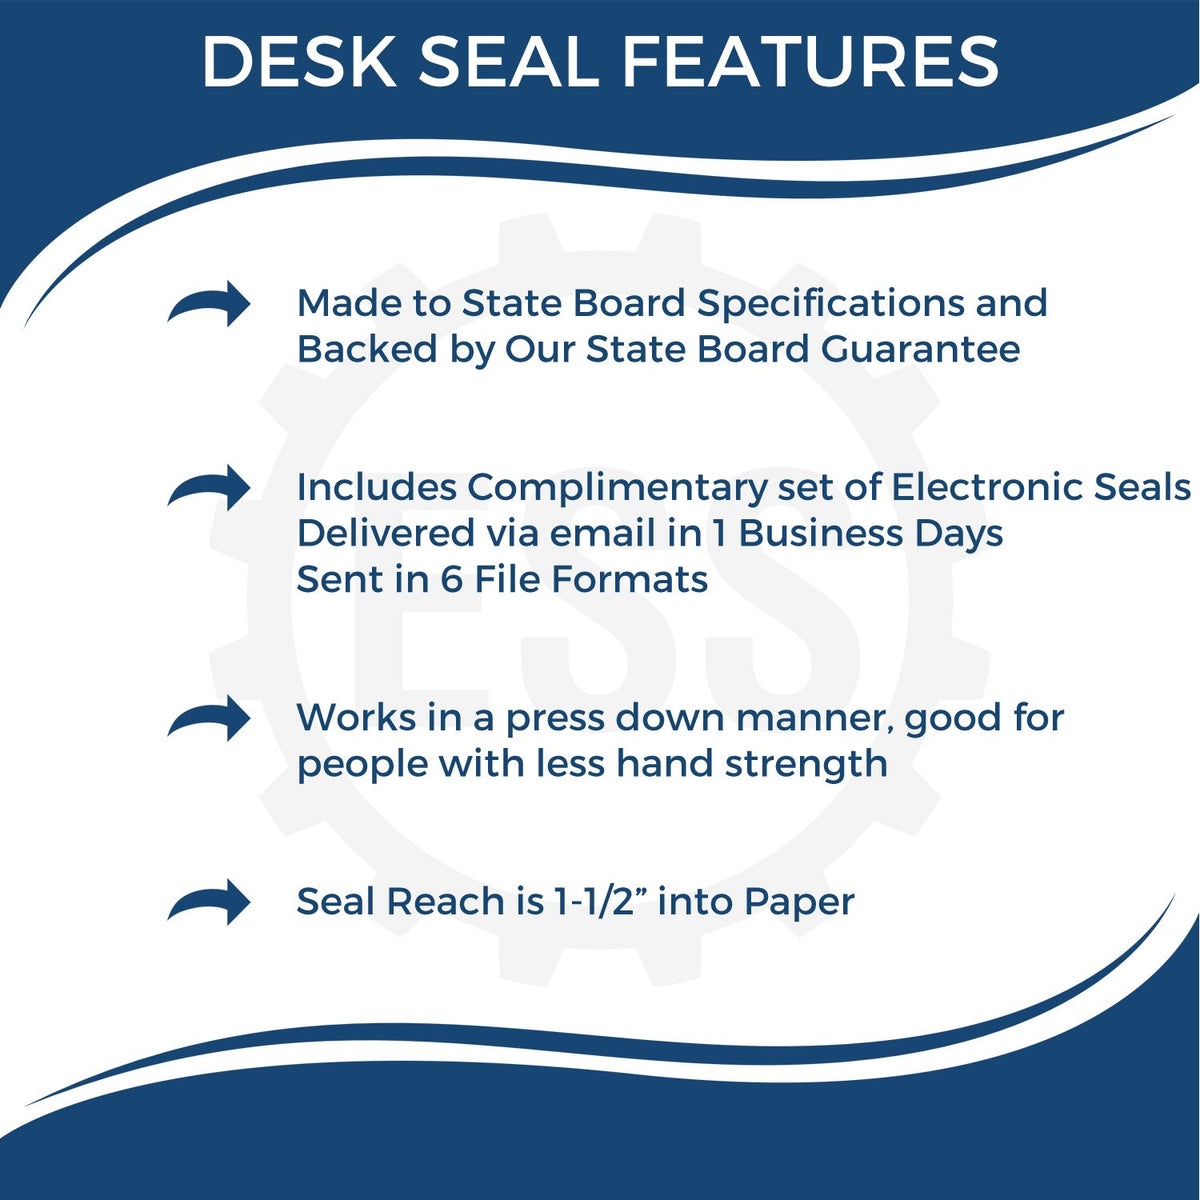 A picture of an infographic highlighting the selling points for the New Mexico Engineer Desk Seal